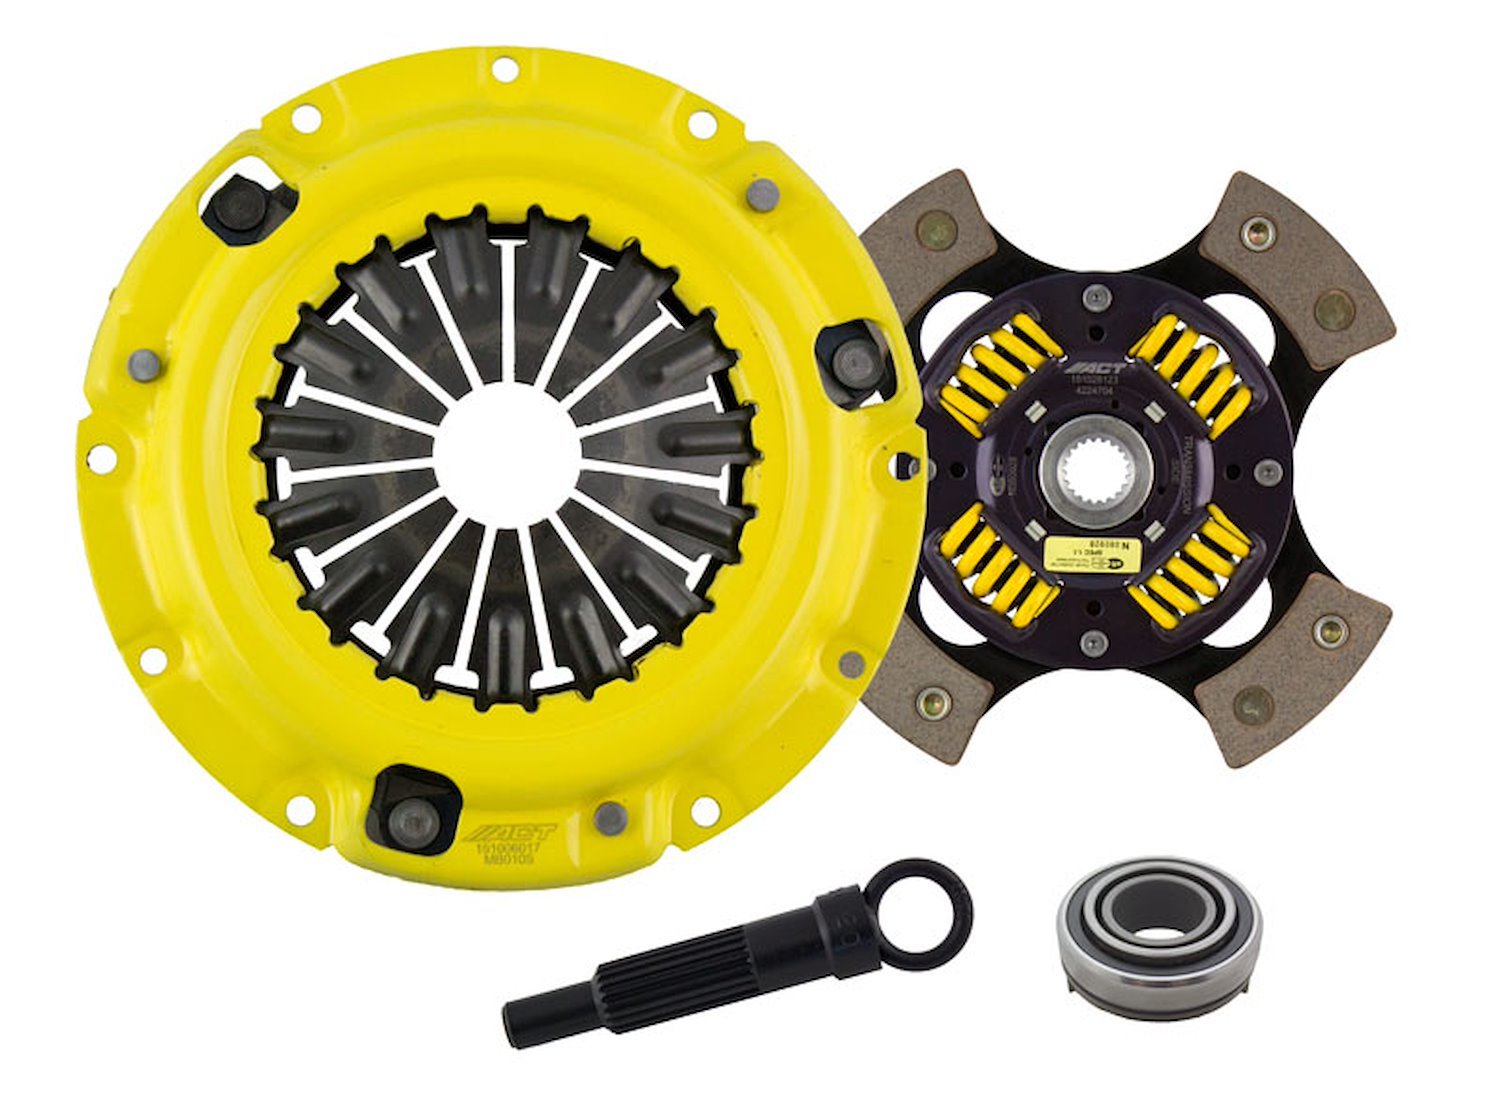 Sport/Race Sprung 4-Pad Transmission Clutch Kit Fits Select Chrysler/Dodge/Eagle/Mitsubishi/Plymouth